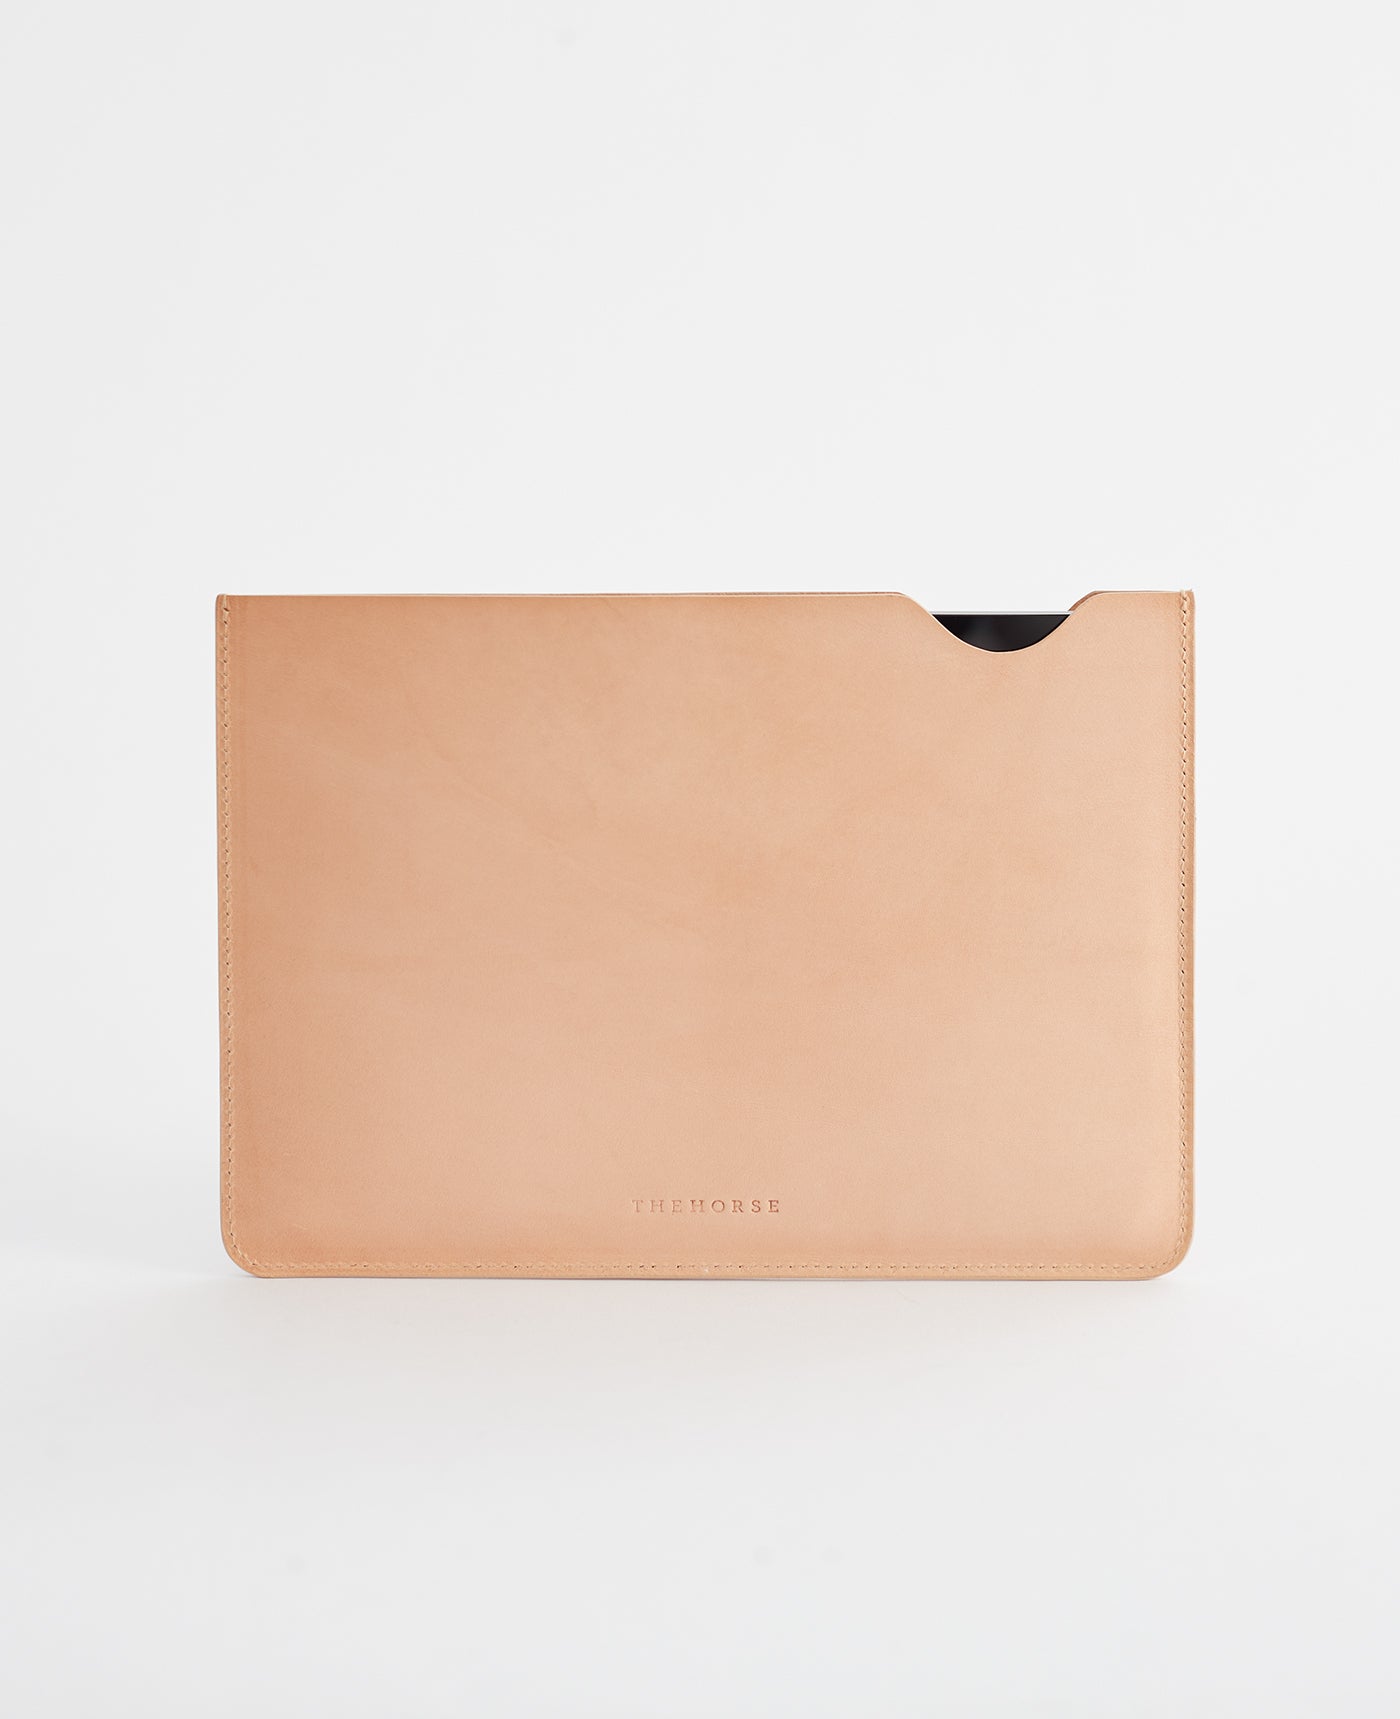 iPad Pro Leather Sleeve in Veg Tan by The Horse®